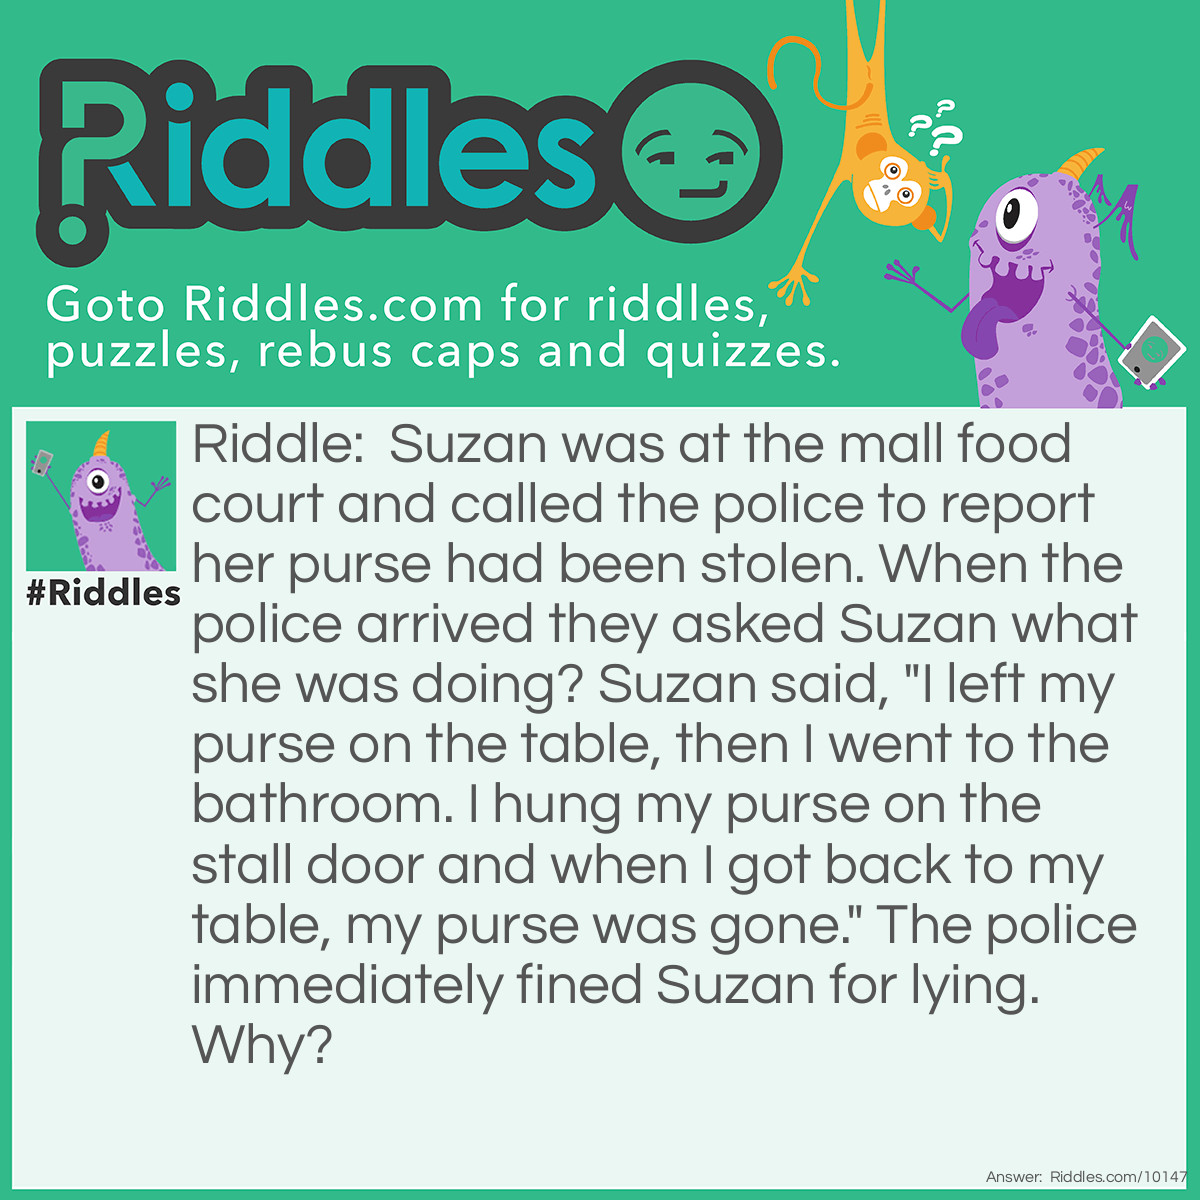 Riddle: Suzan was at the mall food court and called the police to report her purse had been stolen. When the police arrived they asked Suzan what she was doing? Suzan said, "I left my purse on the table, then I went to the bathroom. I hung my purse on the stall door and when I got back to my table, my purse was gone." The police immediately fined Suzan for lying. Why? Answer: Suzan said she left her purse on the table, but she also said she hung up her purse on the bathroom stall door.